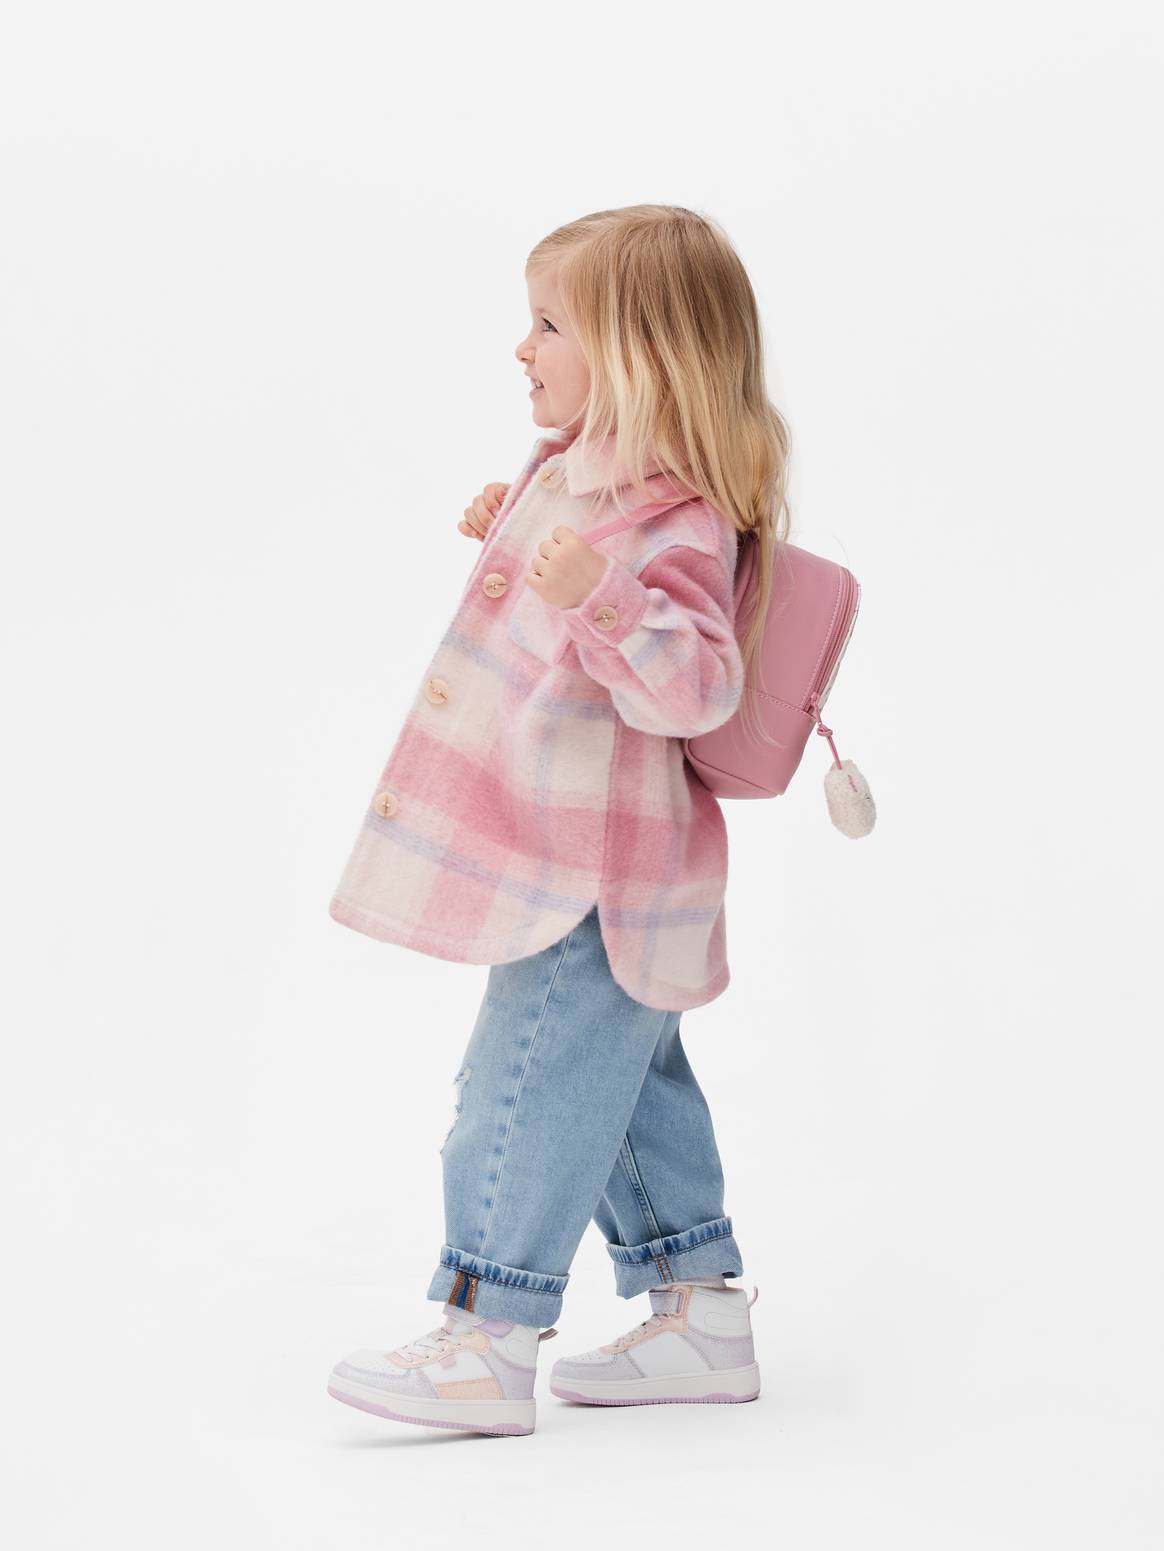 Primark kidswear available from click-and-collect trial